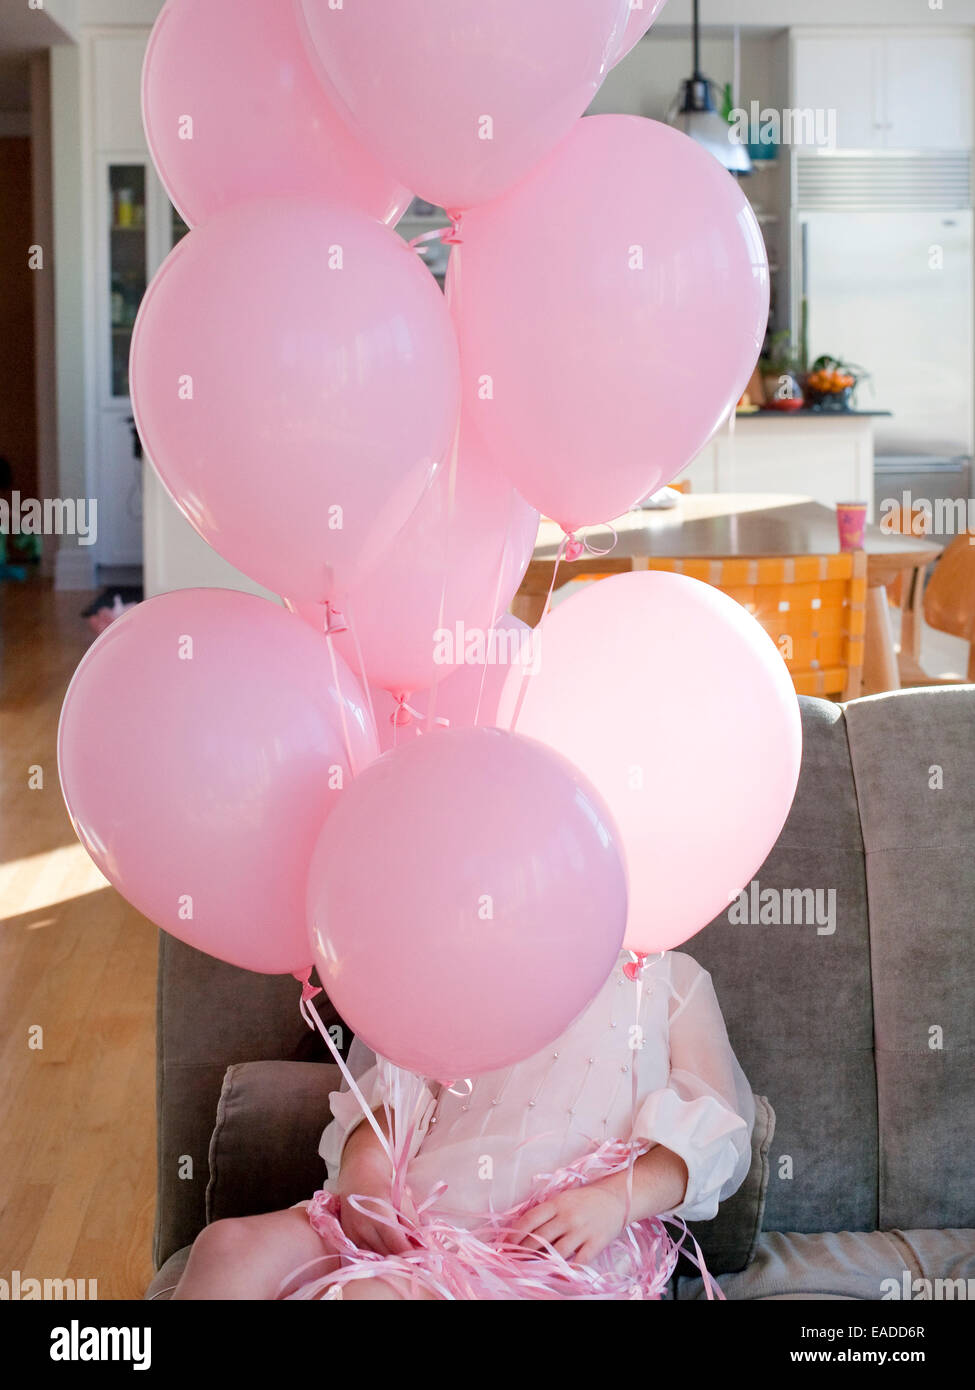 Girl in pink party dress holding ballons roses Banque D'Images